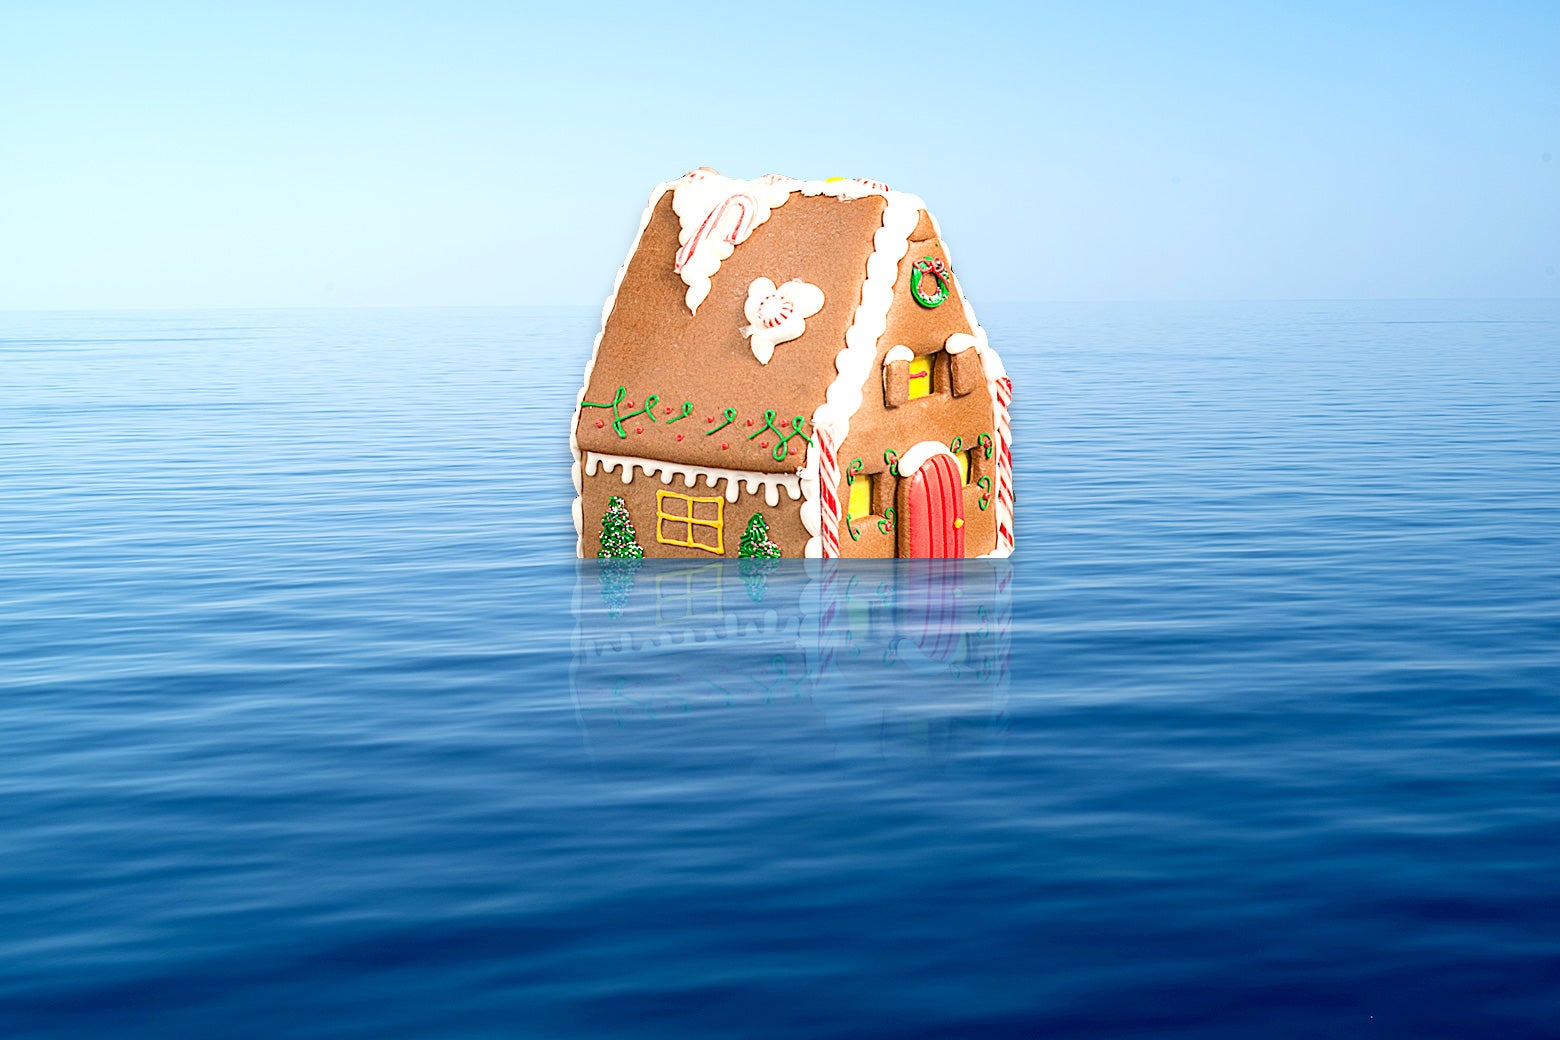 A gingerbread house floating in the middle of the ocean.